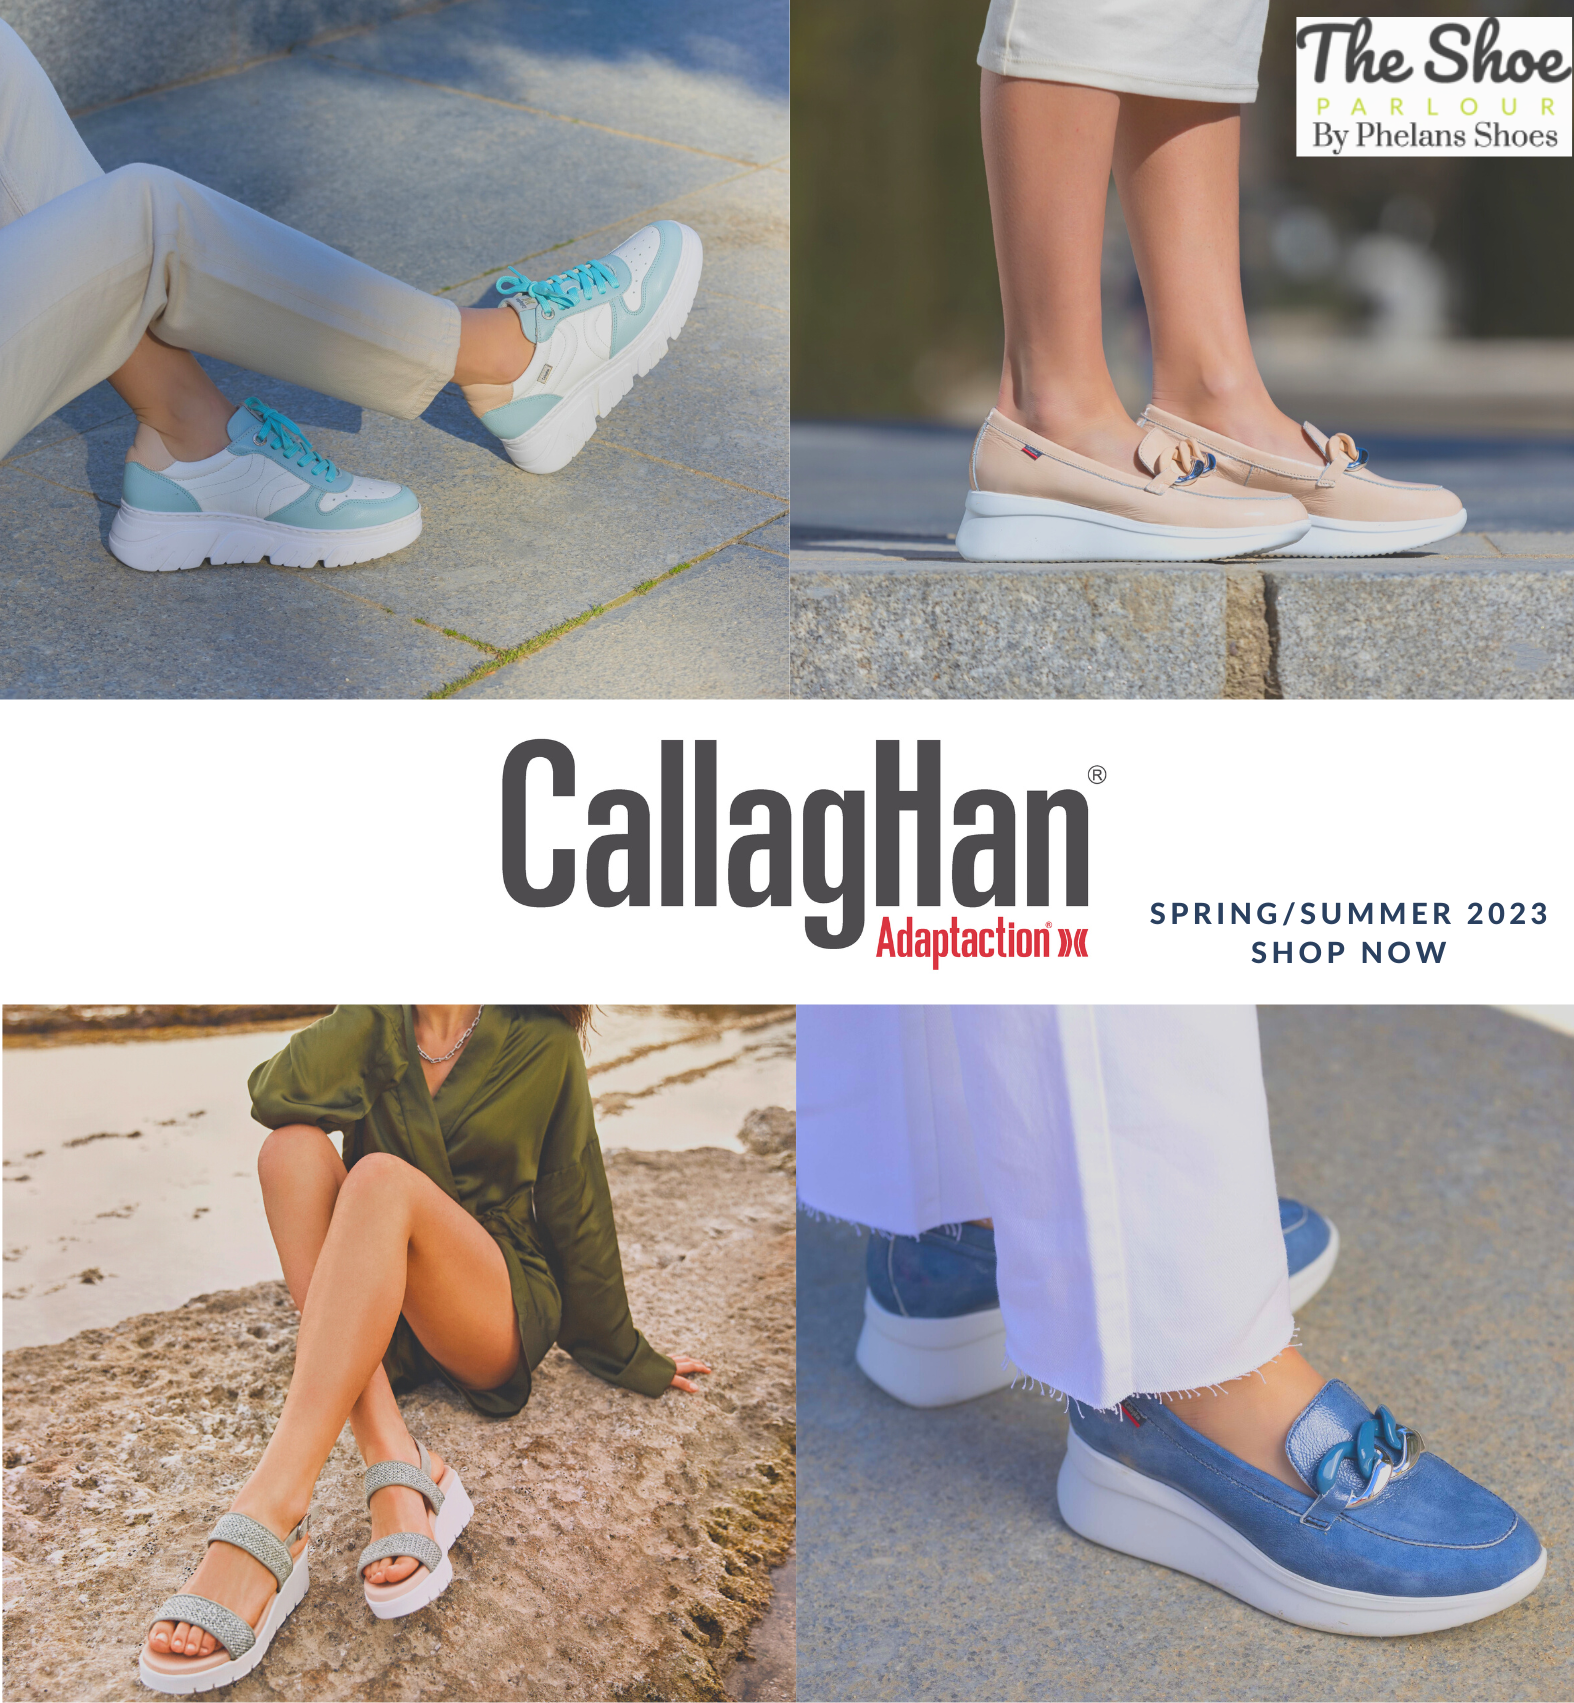 New spring summer footwear Callaghan collection for women.